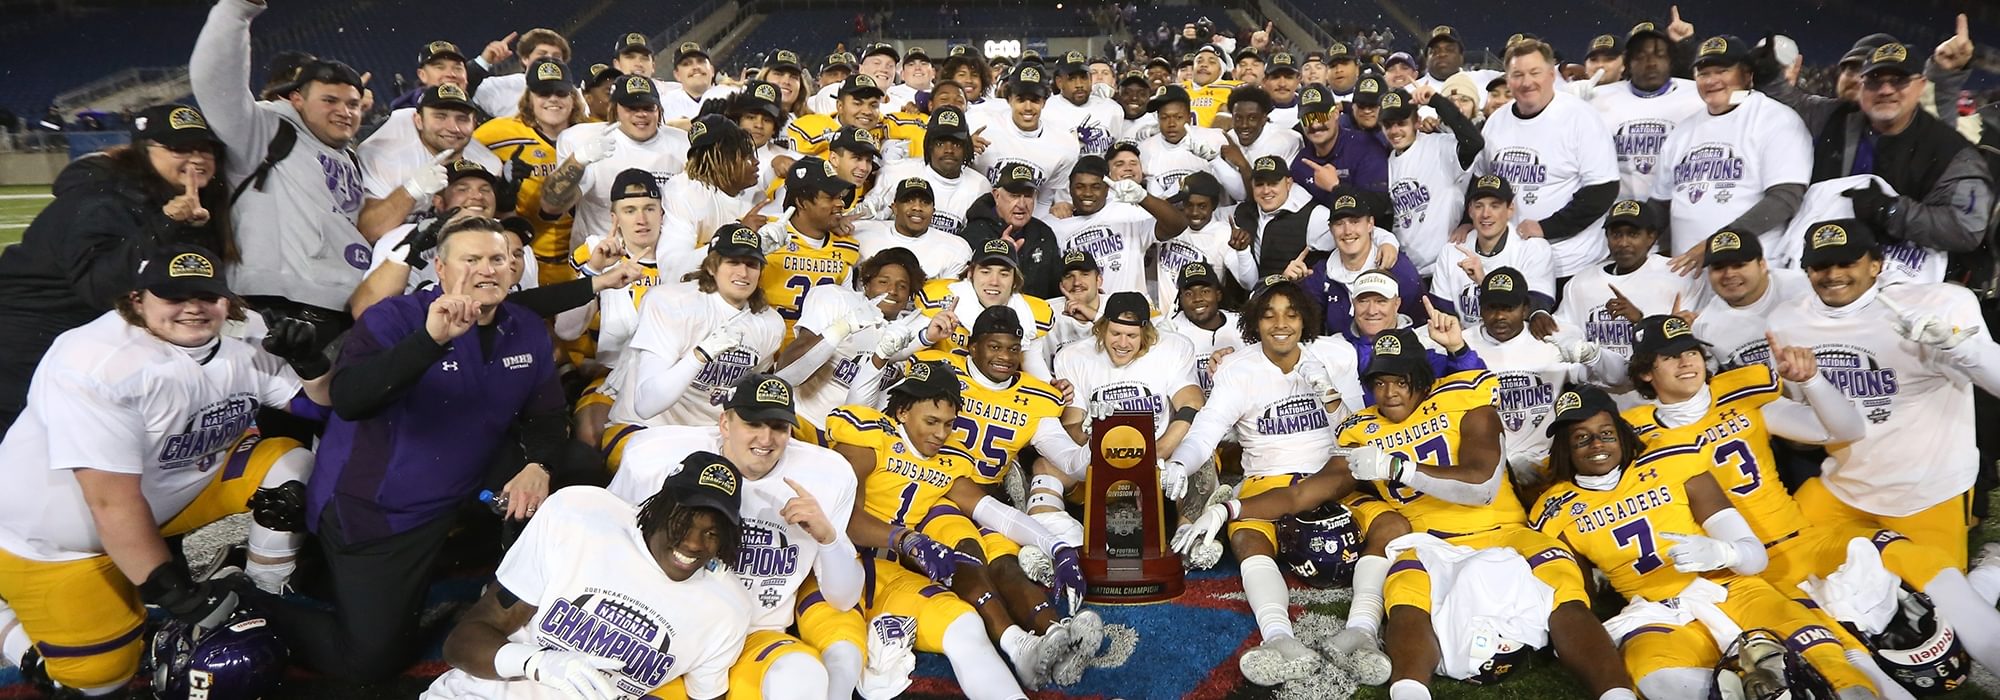 Cru Football Team Wins 20th Game in 2021 with 57-24 Win in Stagg Bowl XLVIII